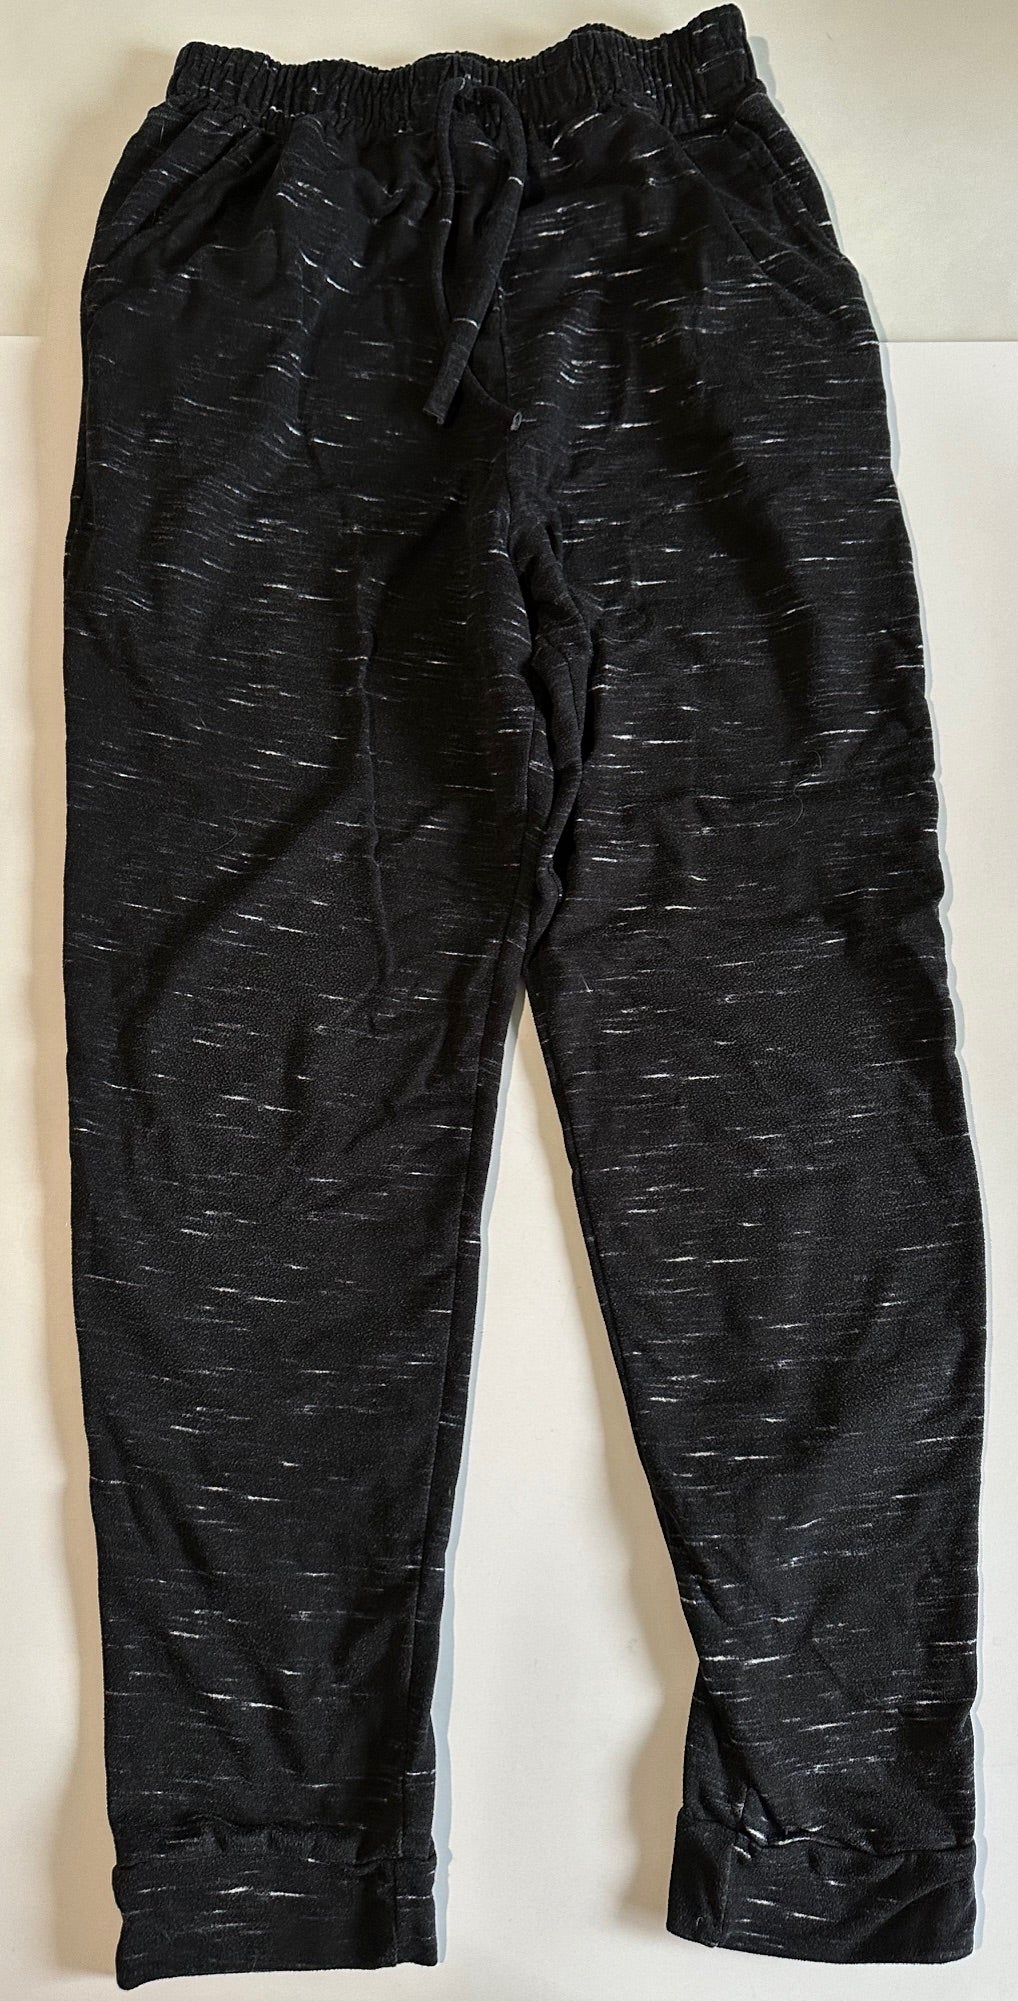 *Play* Shosho, Black and White Speckled Comfy Pants - Size 12